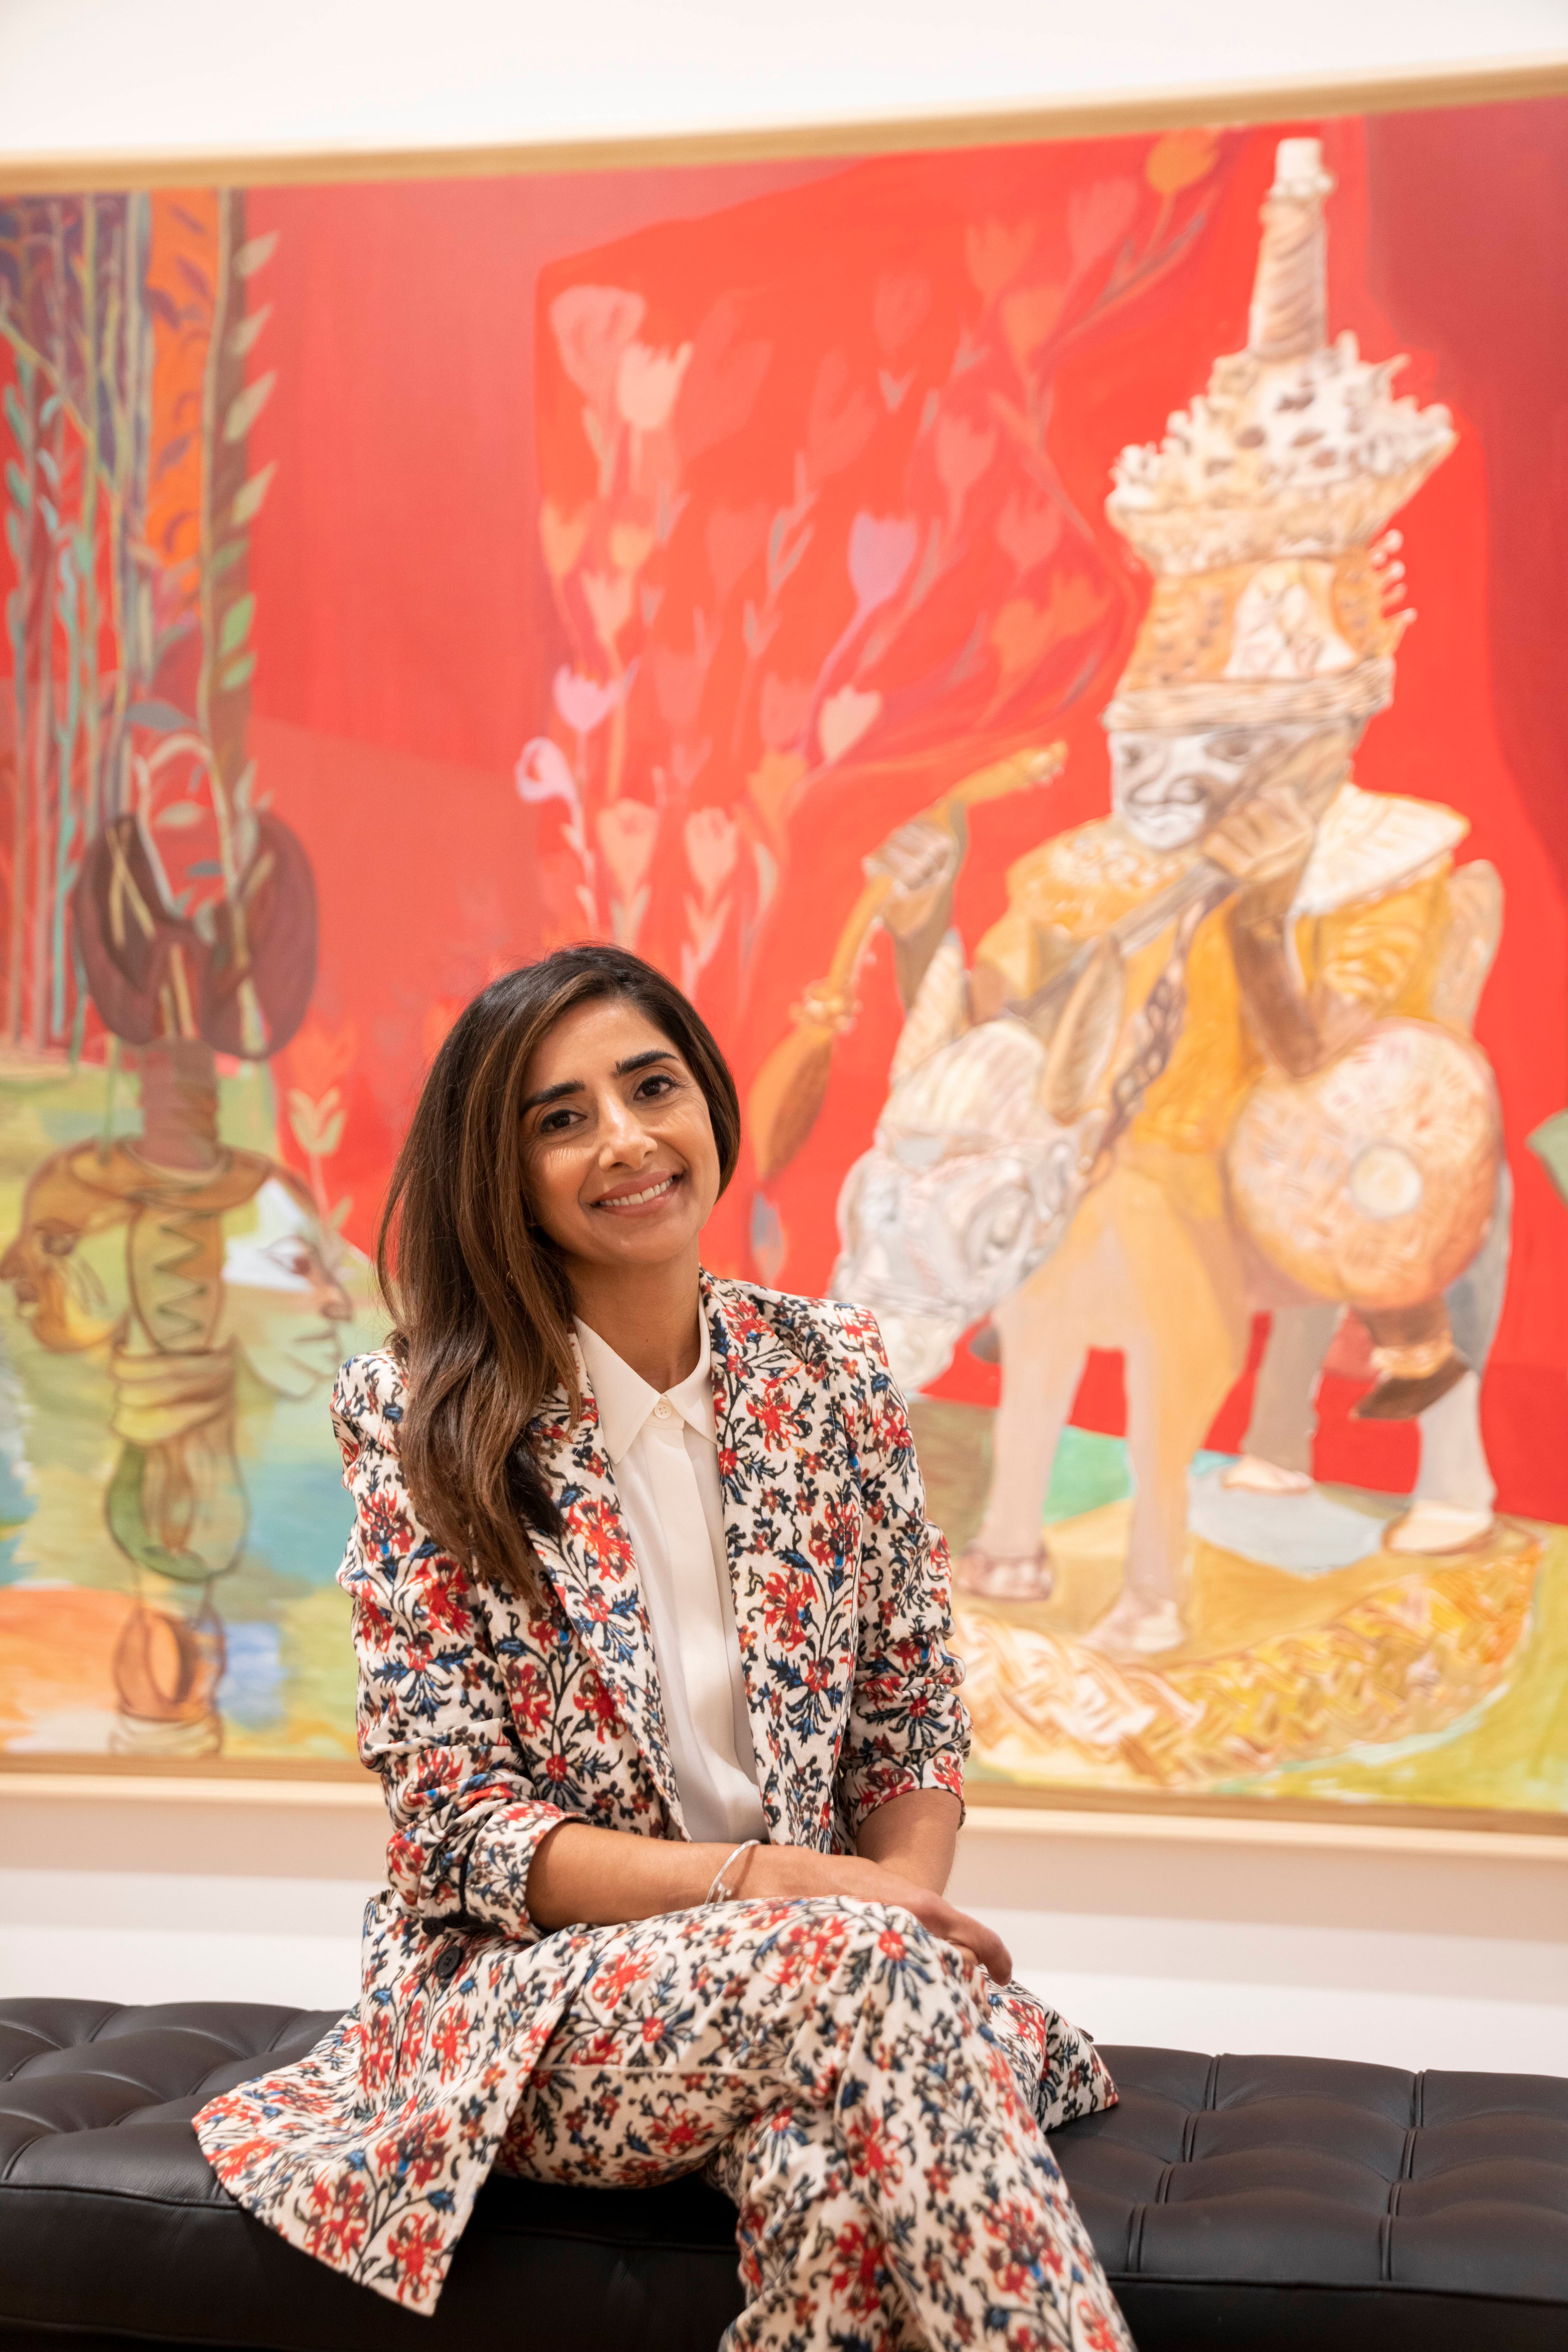 Asma Naeem, The Eddie C. and C. Sylvia Brown Chief Curator, stands in front of recent works on paper by Salman Toor in the exhibition Salmon toor: No Ordinary Love, on view through October 23, 2022.